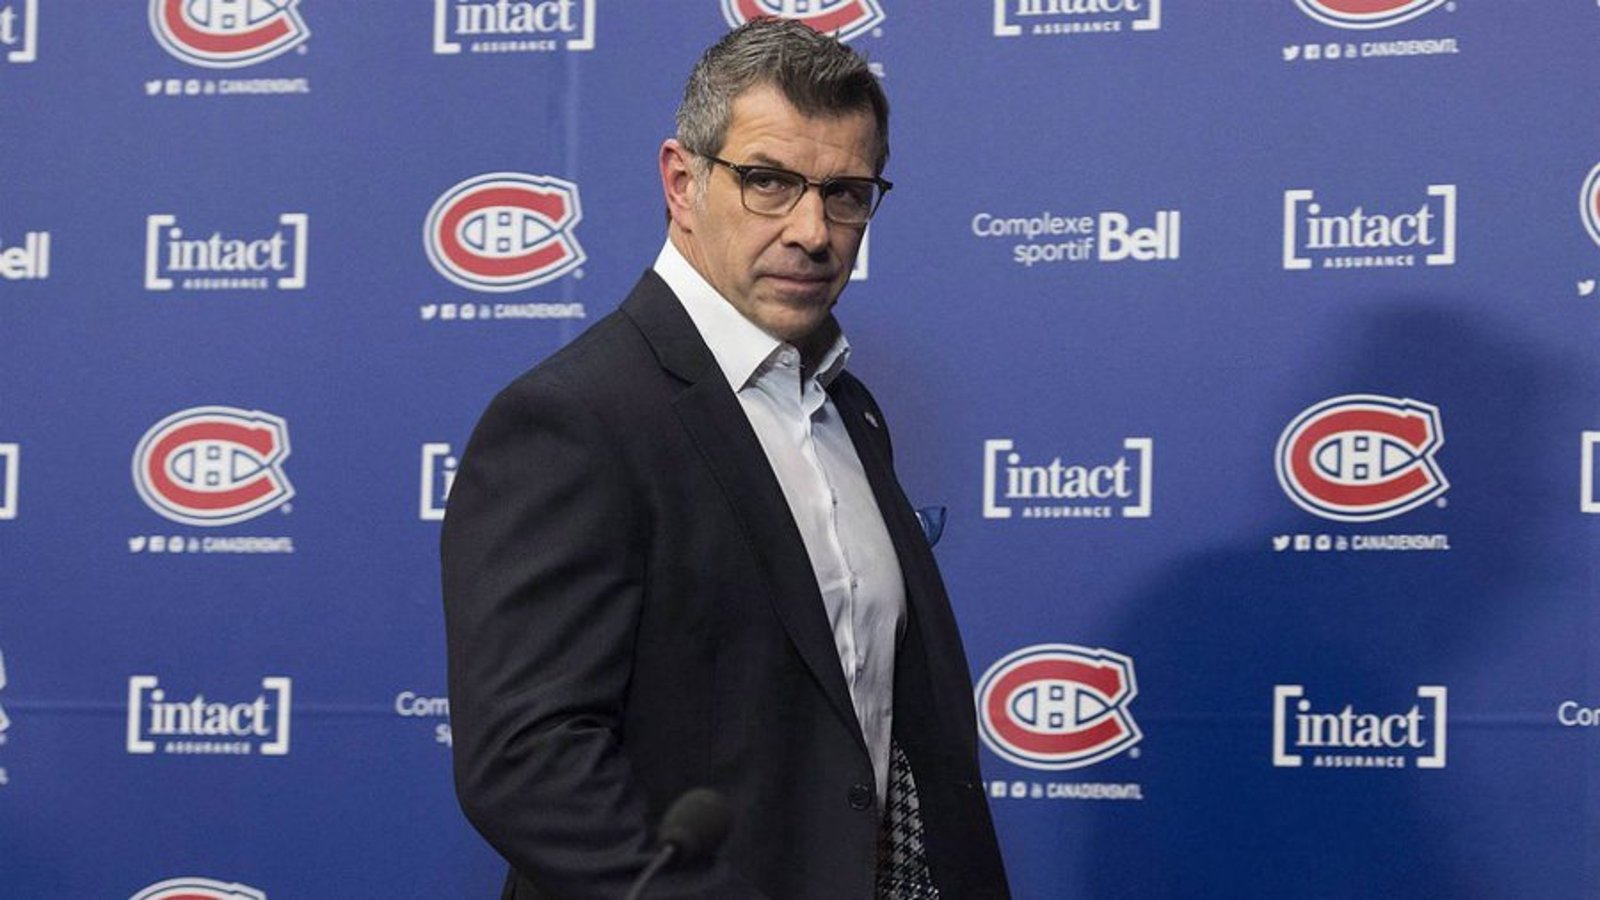 Is Marc Bergevin preparing another offer sheet?!